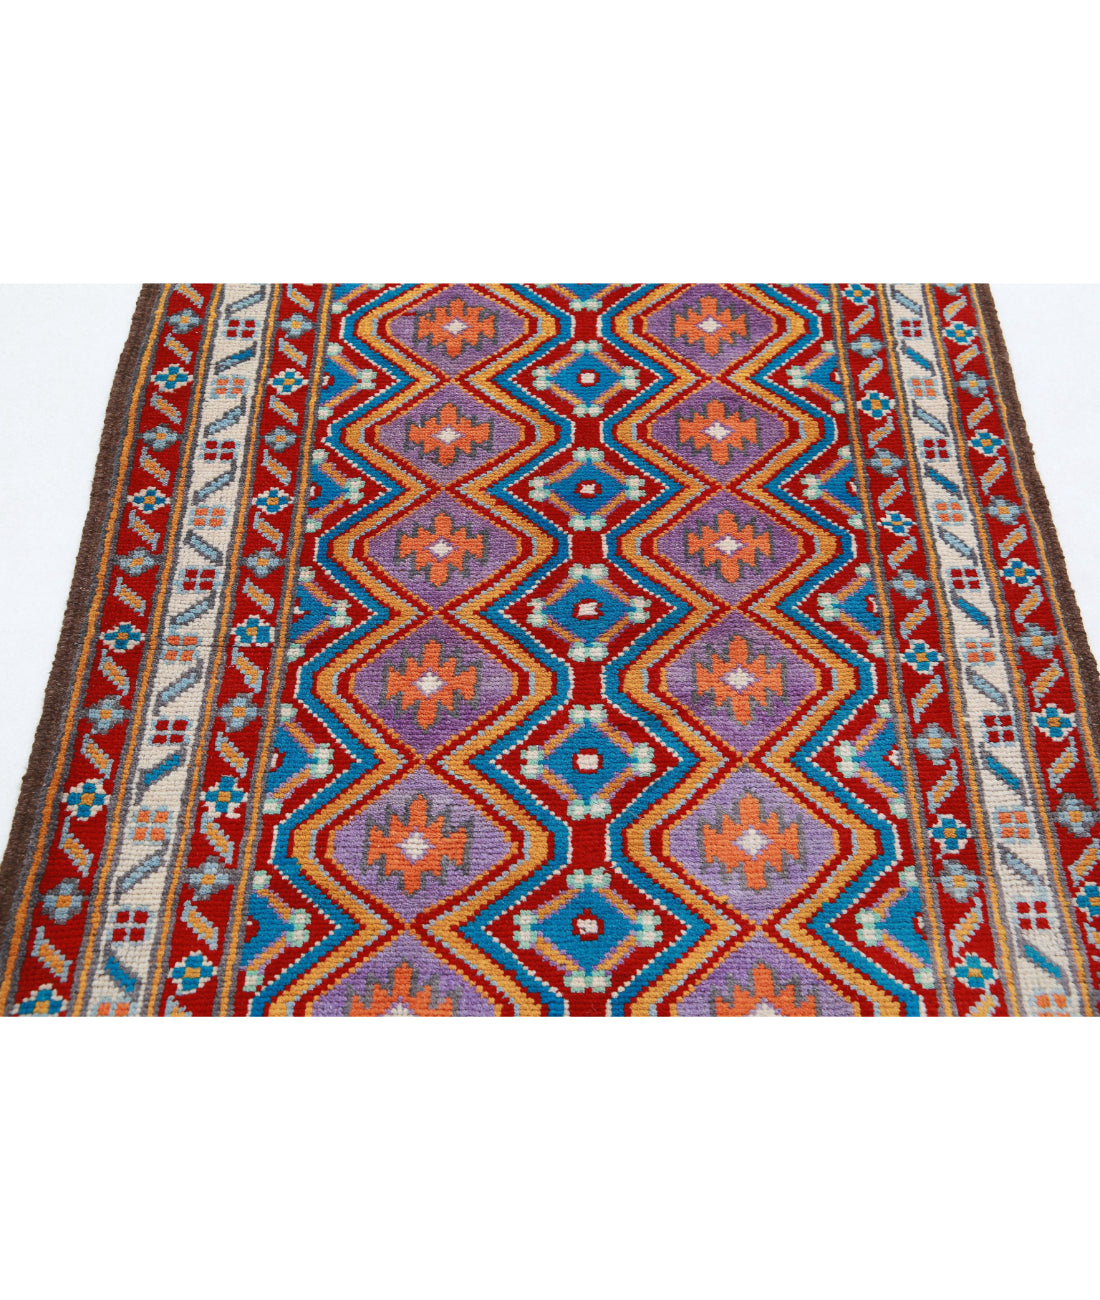 Revival 3'5'' X 5'0'' Hand-Knotted Wool Rug 3'5'' x 5'0'' (103 X 150) / Multi / Red